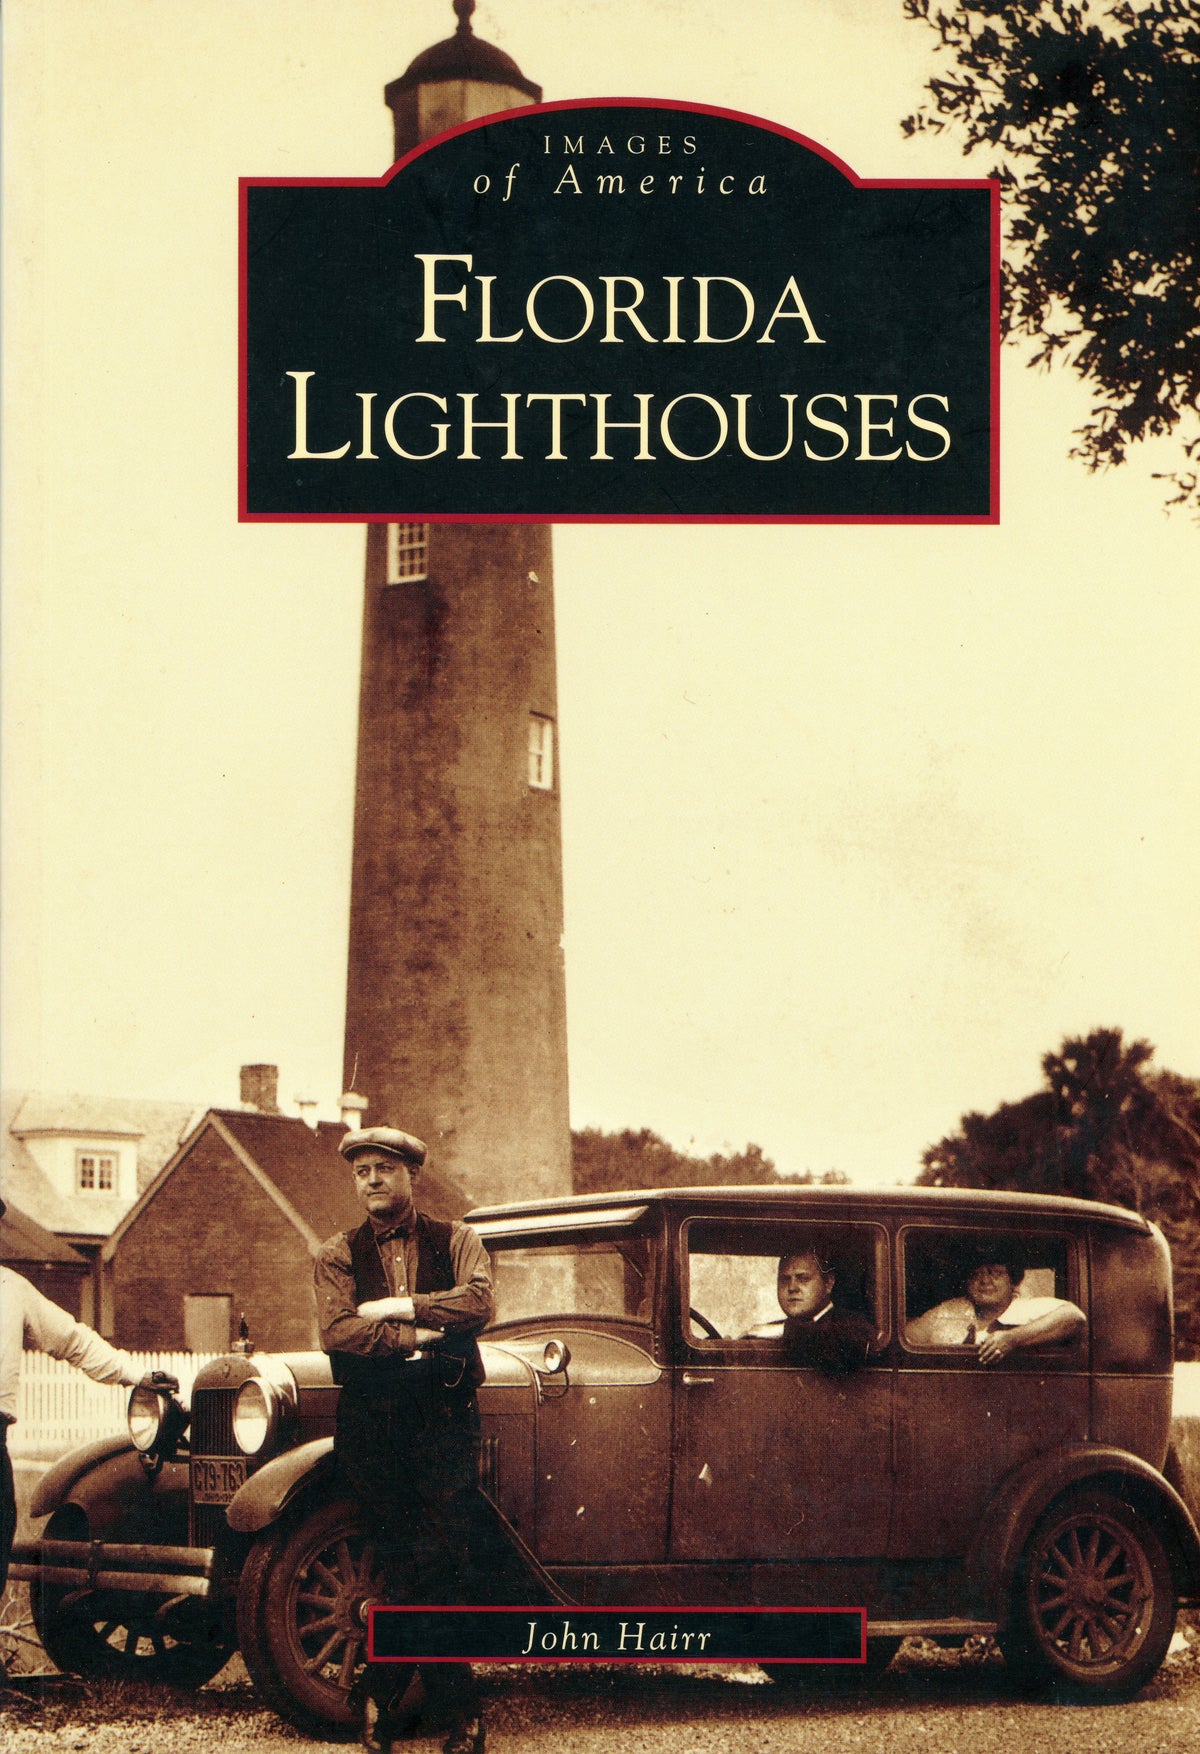 Images of America: Florida Lighthouses